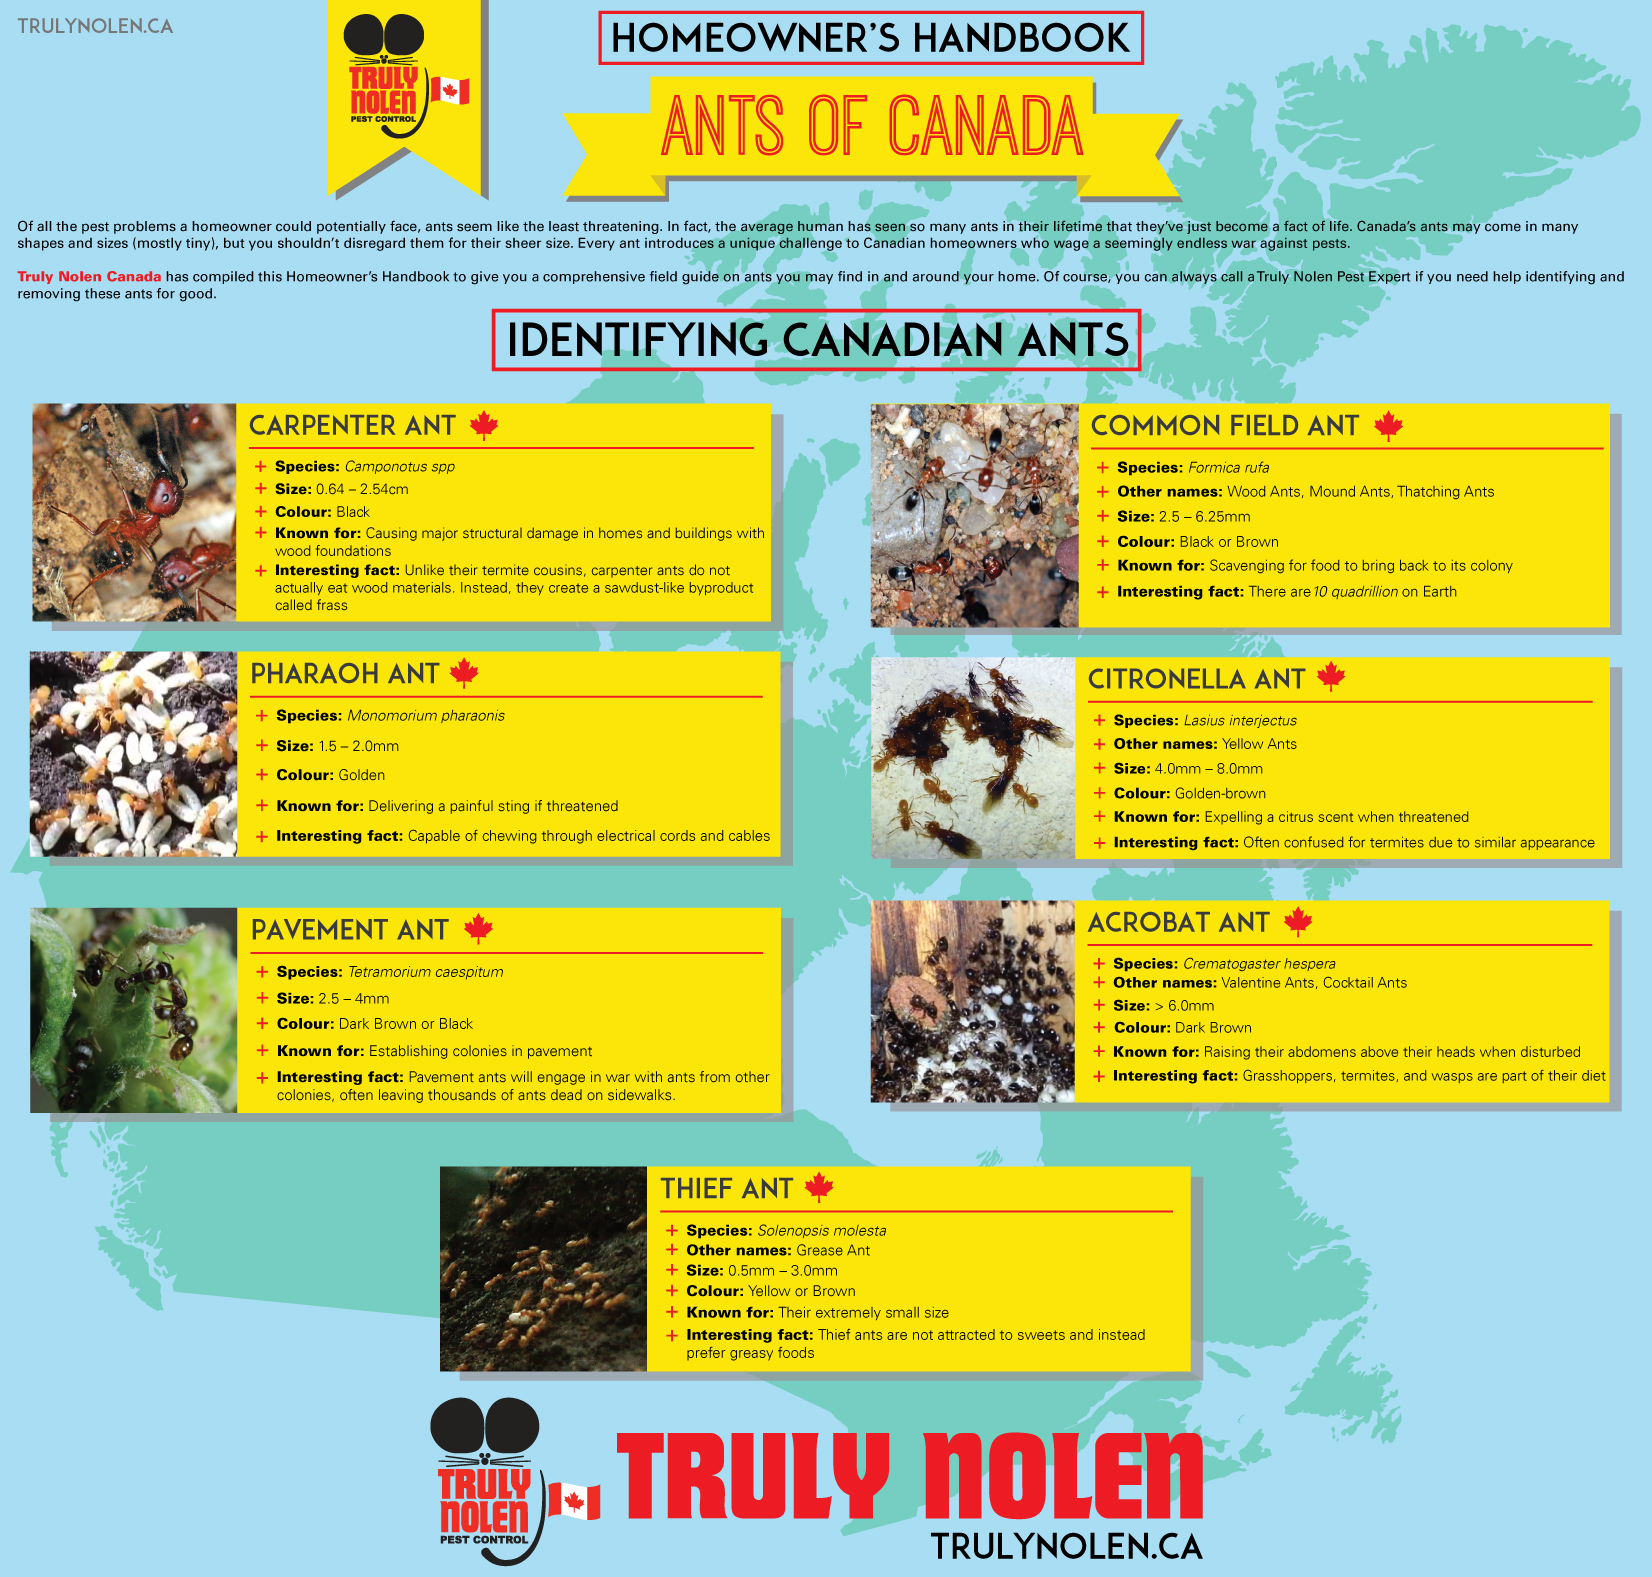 ants-of-canada-infographic-updated 051414